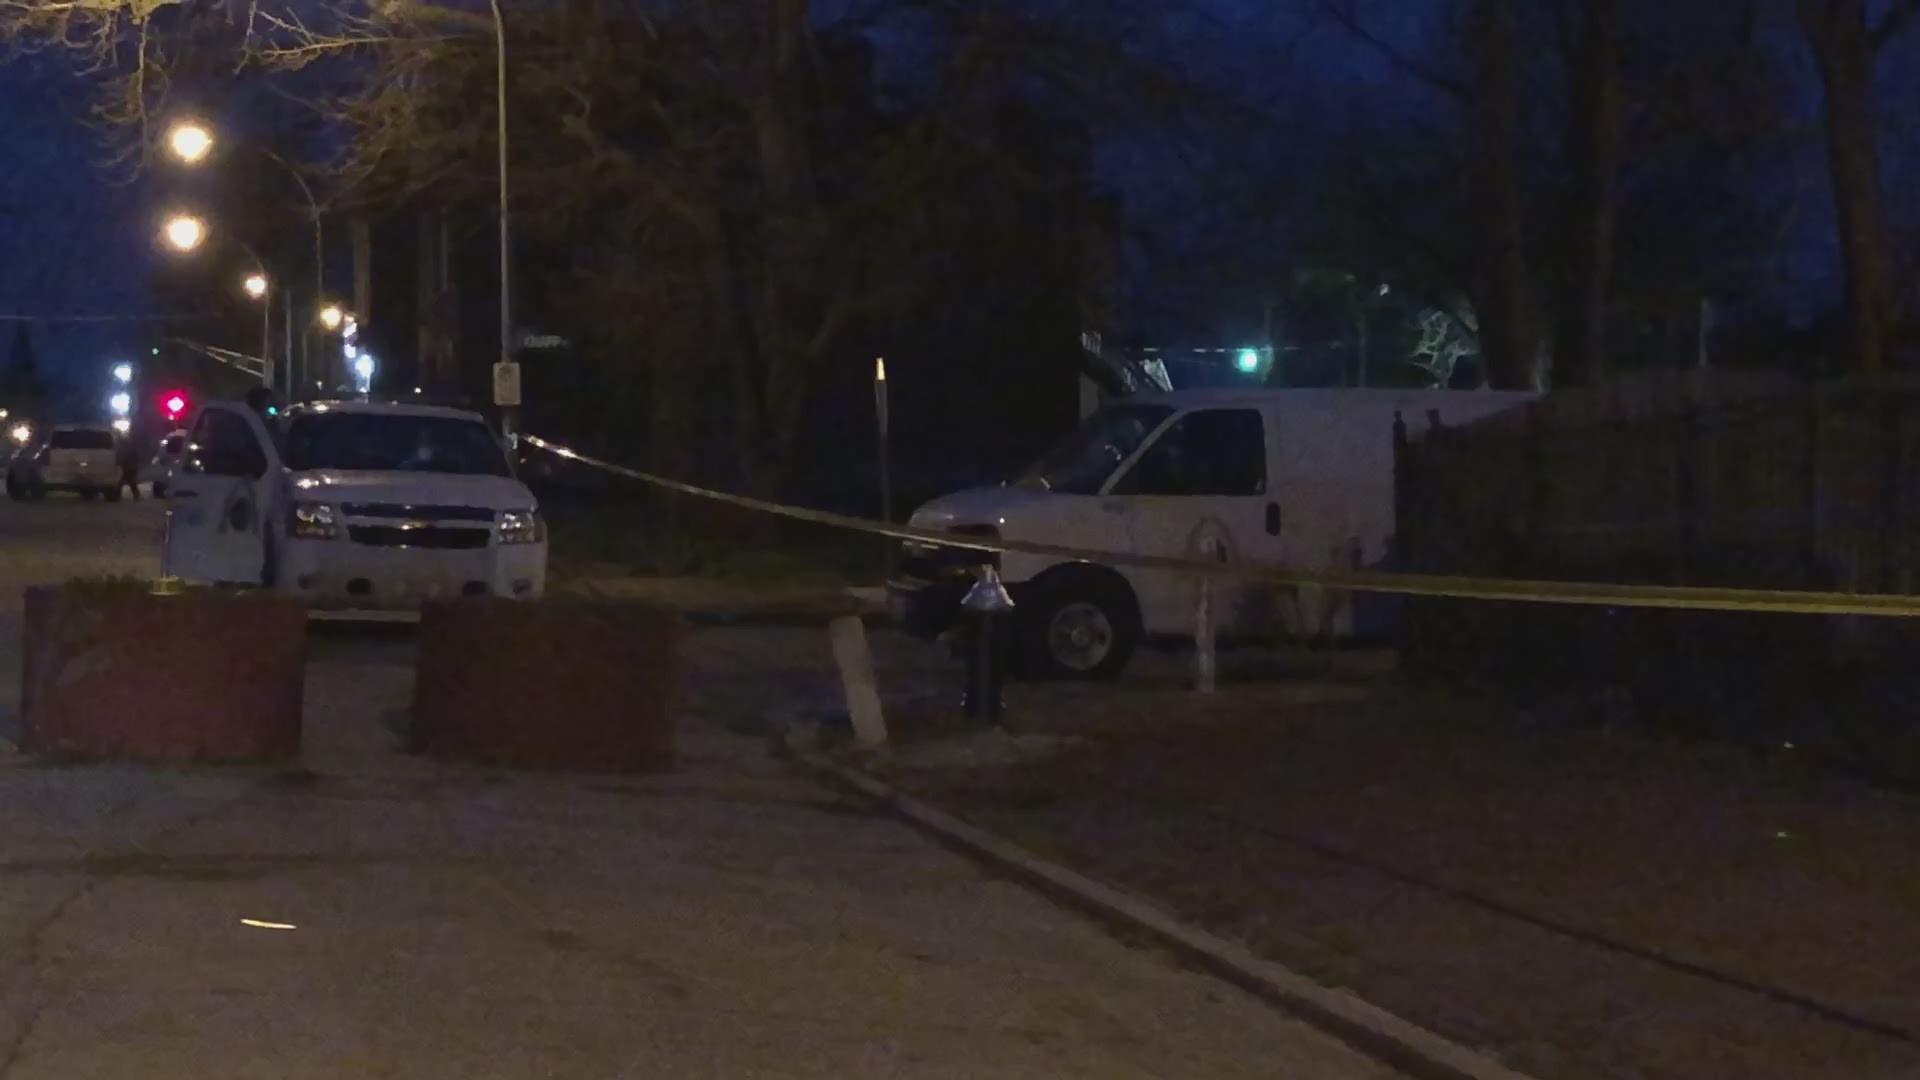 The woman was found stabbed around 5:10 a.m. in Old North St. Louis